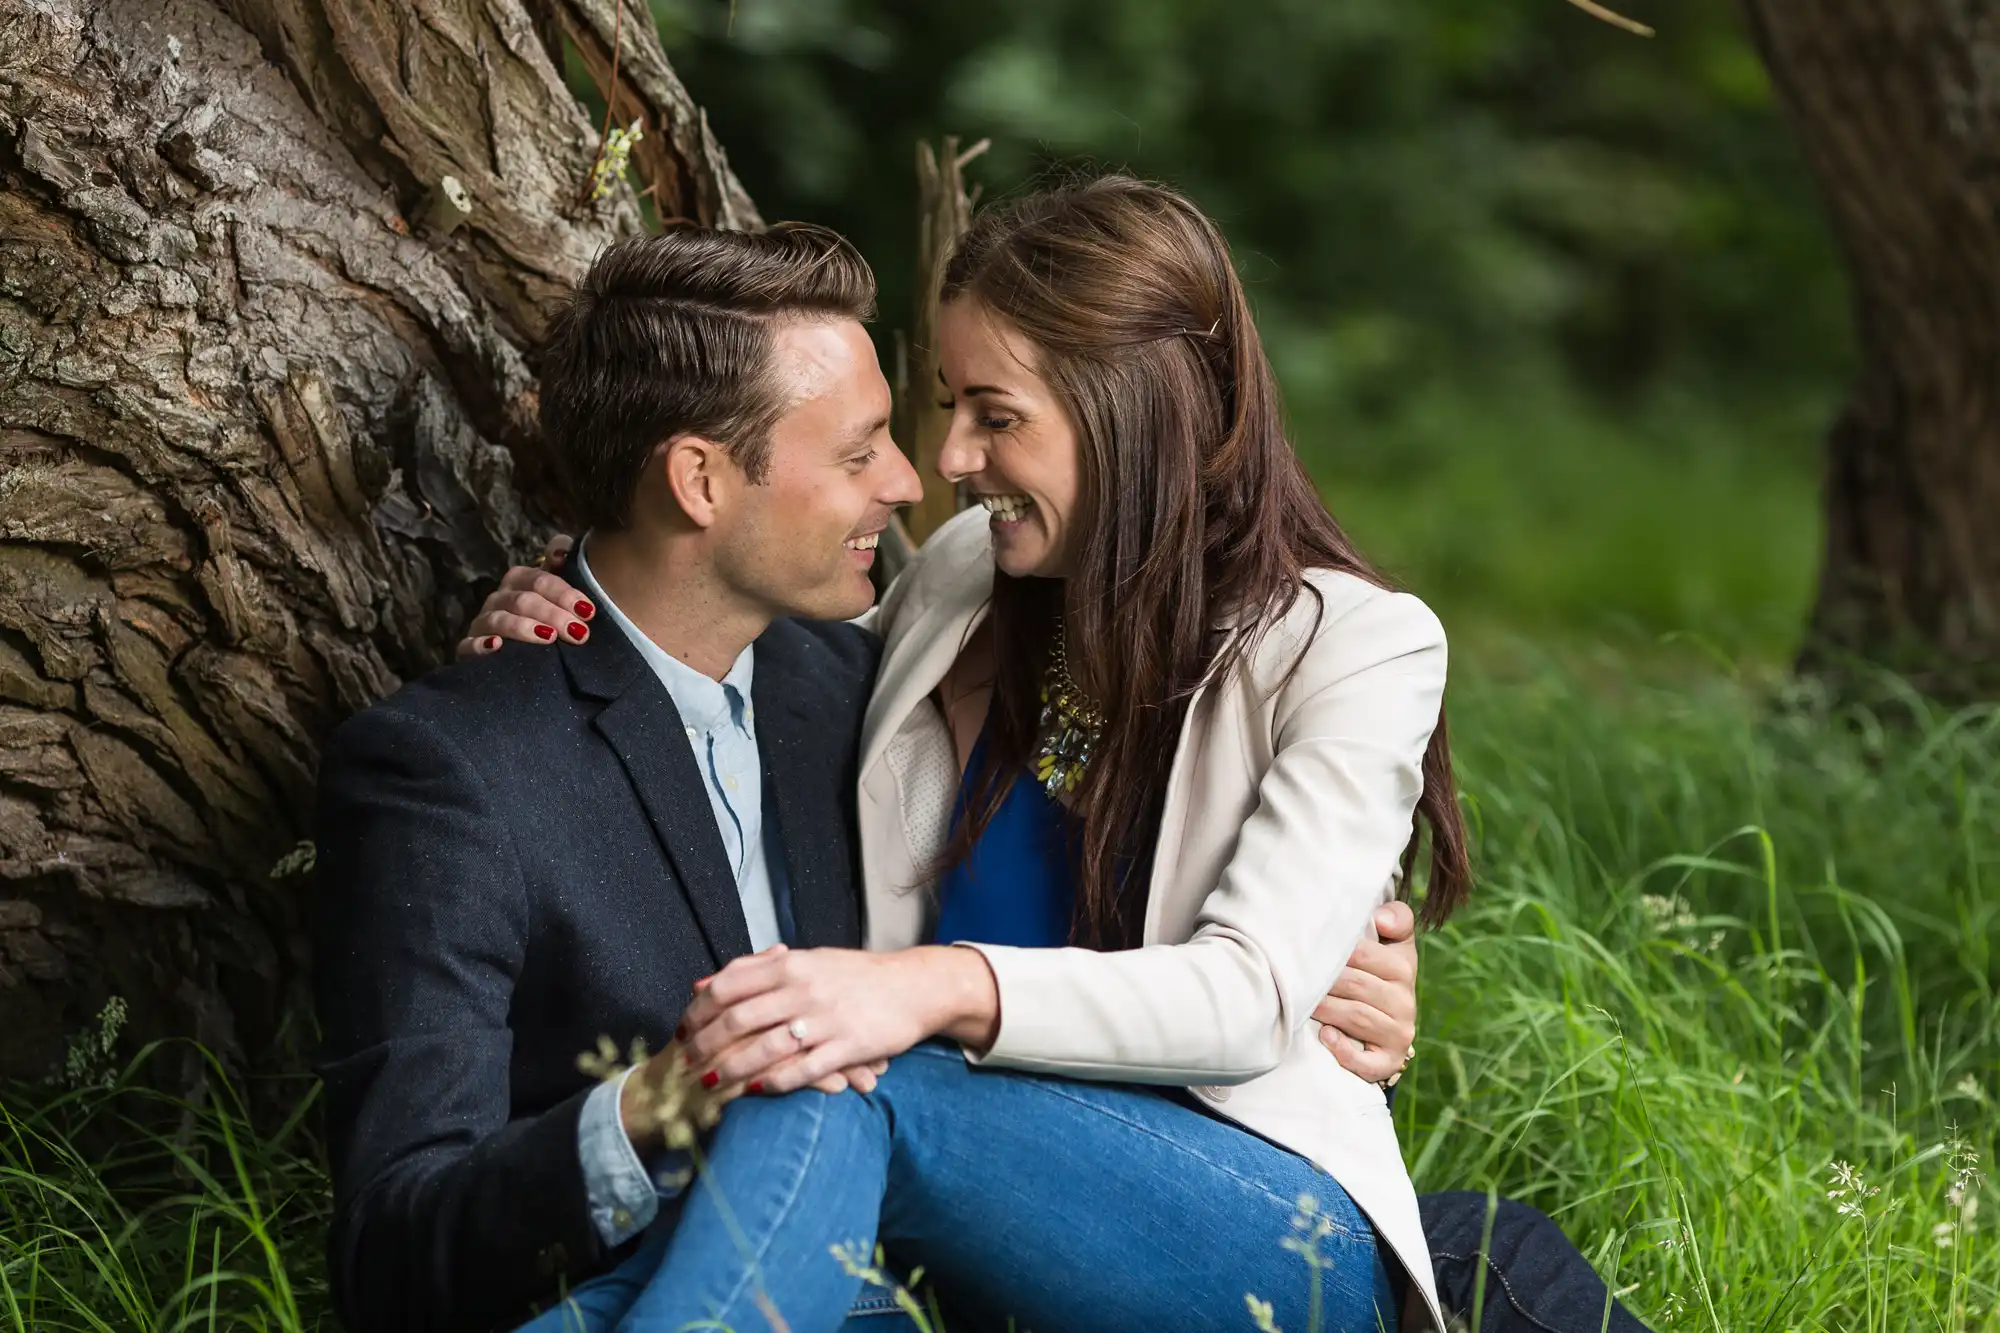 A couple sitting closely by a tree, smiling at each other in a lush green park.